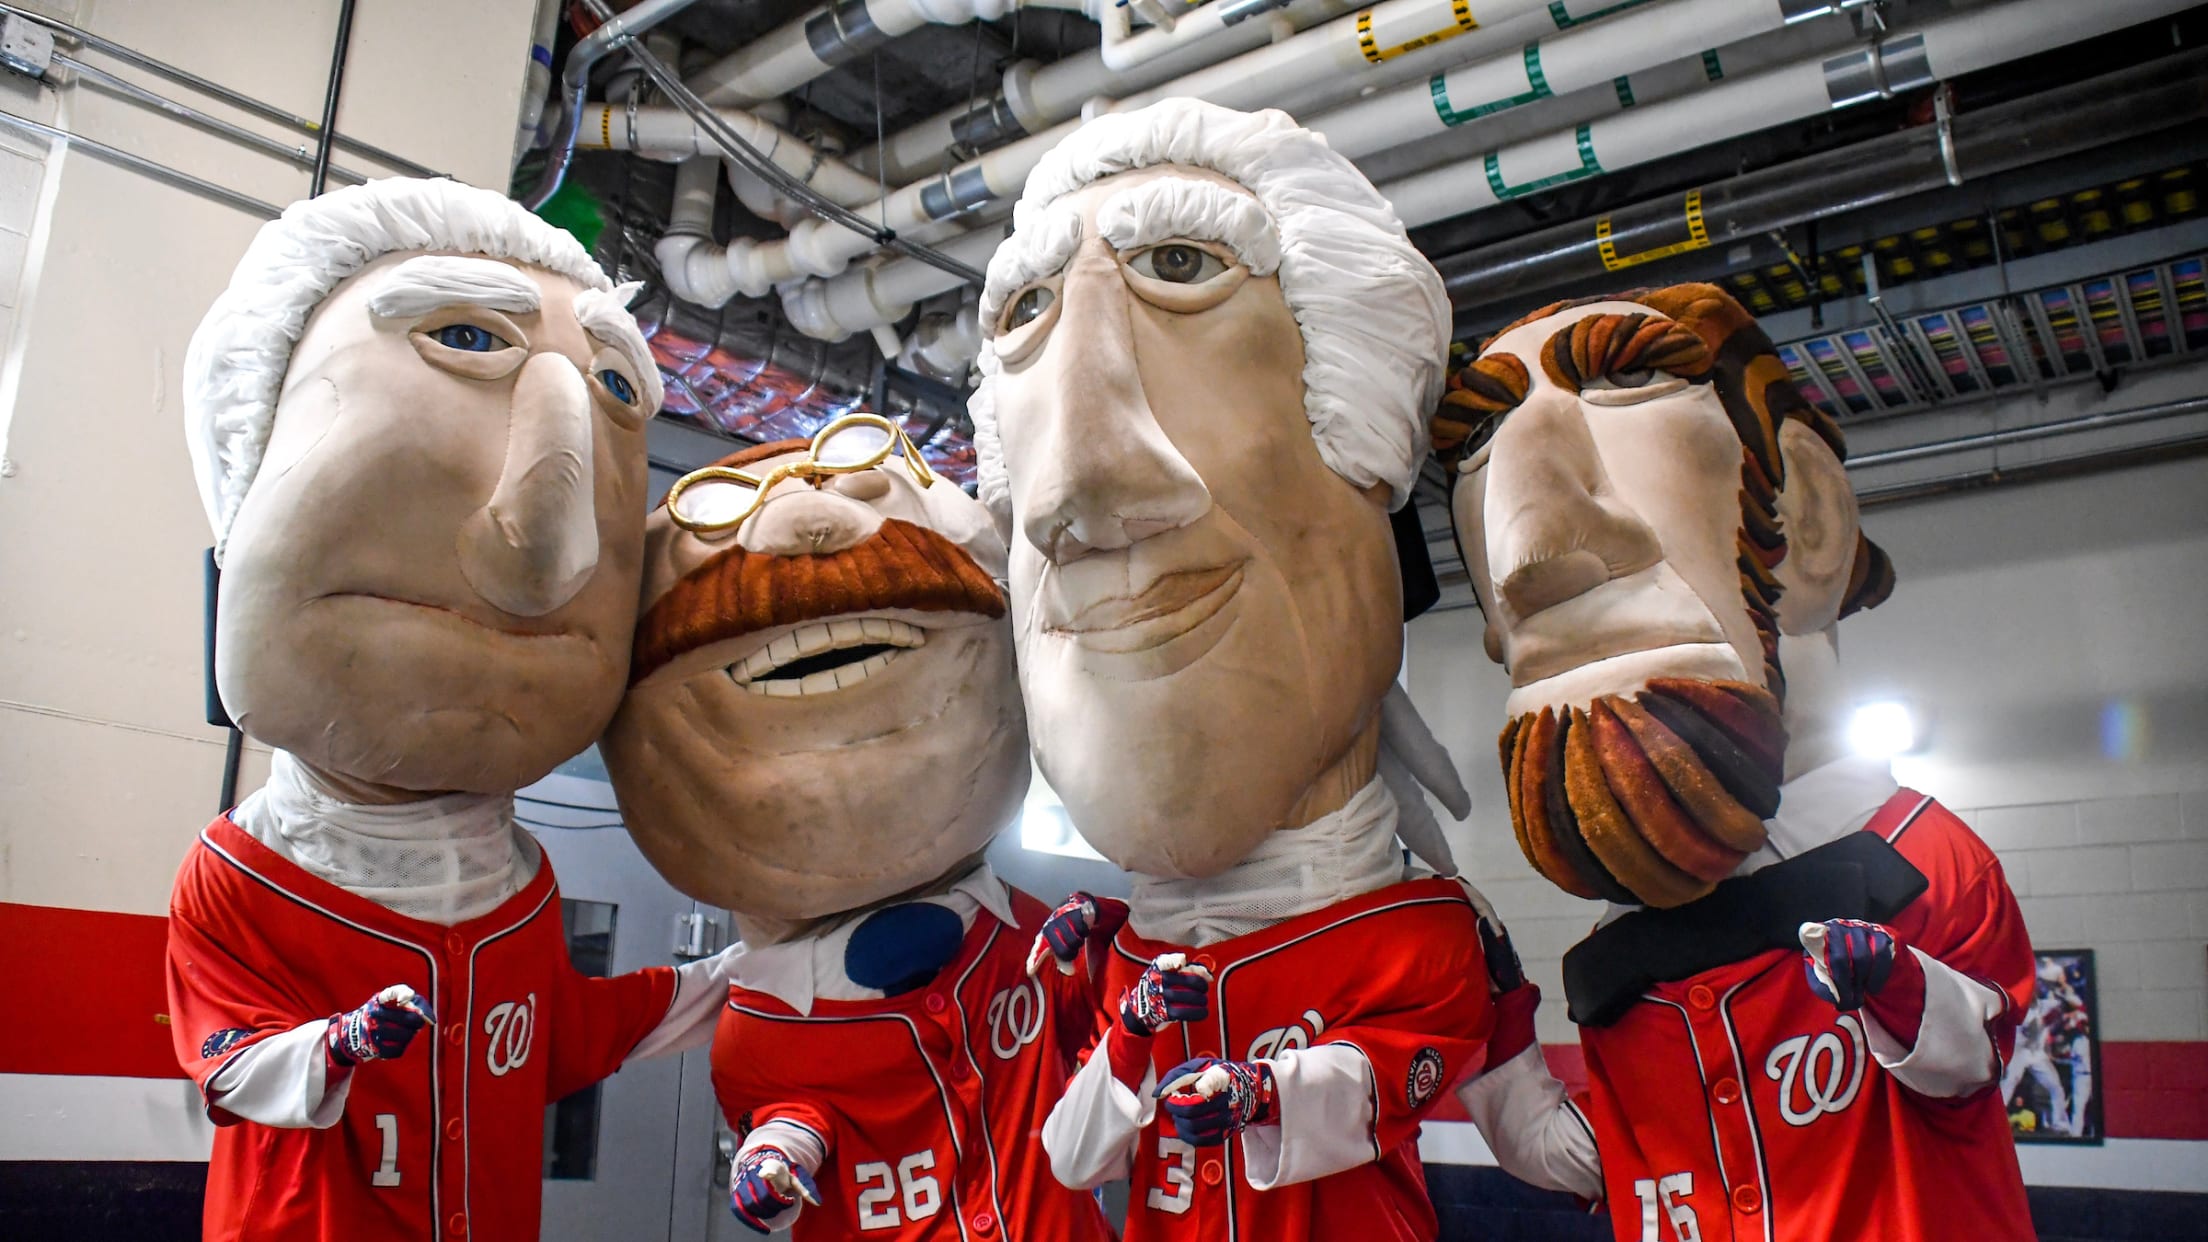 Running for president: The Nats hold mascot tryouts - WTOP News